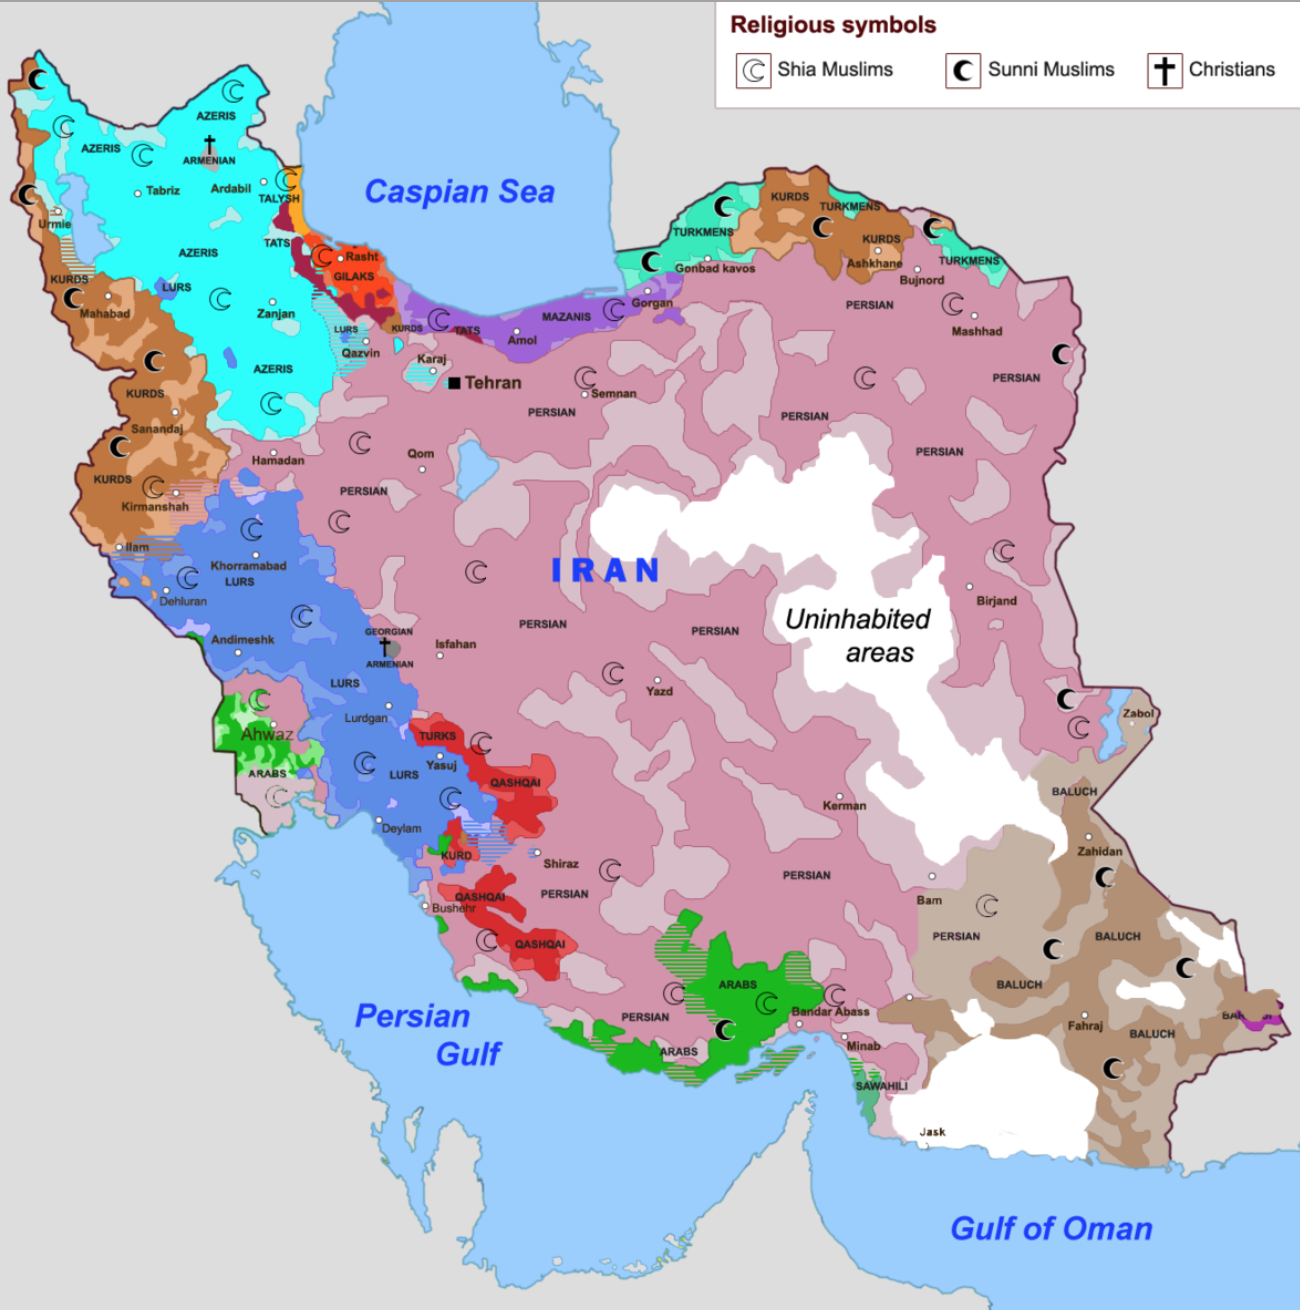 //commons.wikimedia.org/wiki/File:Ethnicities_and_religions_in_Iran.png?uselang=de